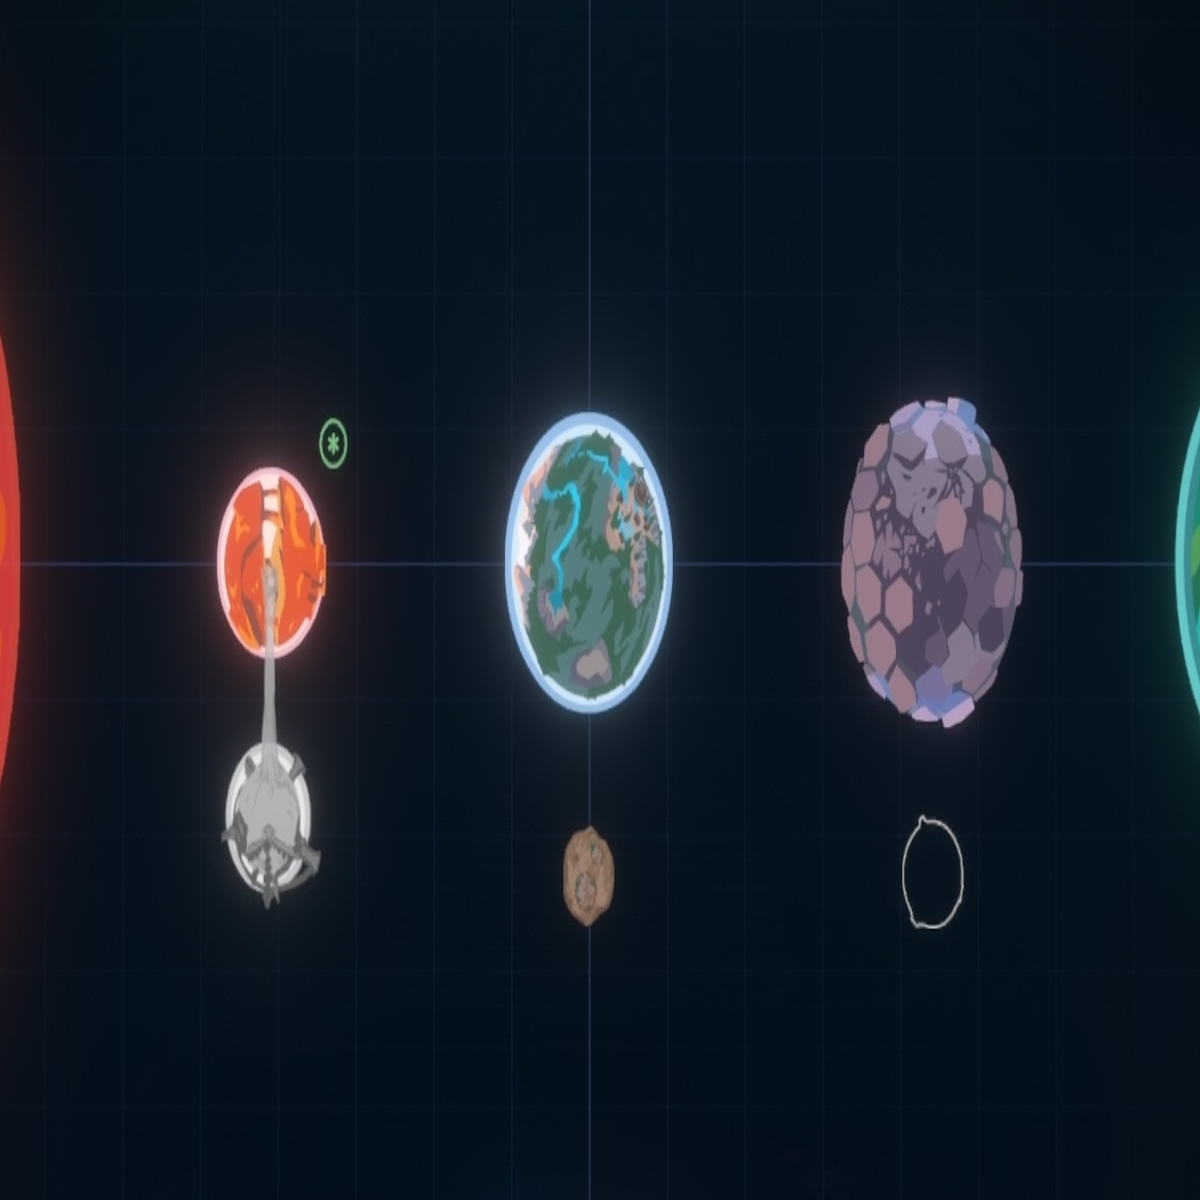 Secret Words - A mod that creates 5 custom planets on Outer Wilds